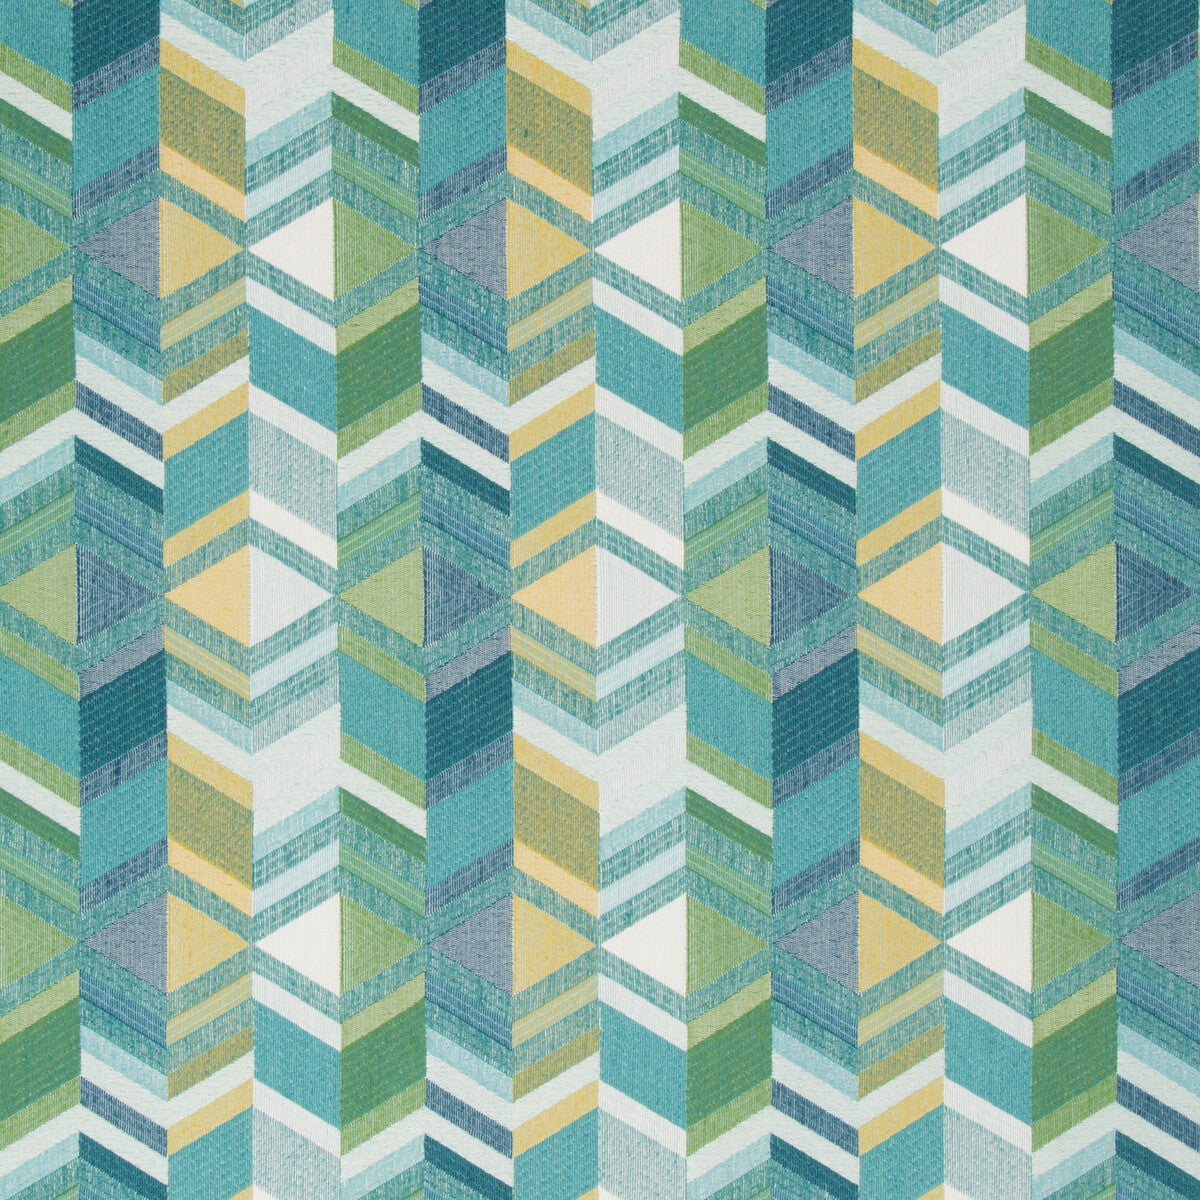 Kravet Design fabric in 35014-413 color - pattern 35014.413.0 - by Kravet Design in the Performance Crypton Home collection